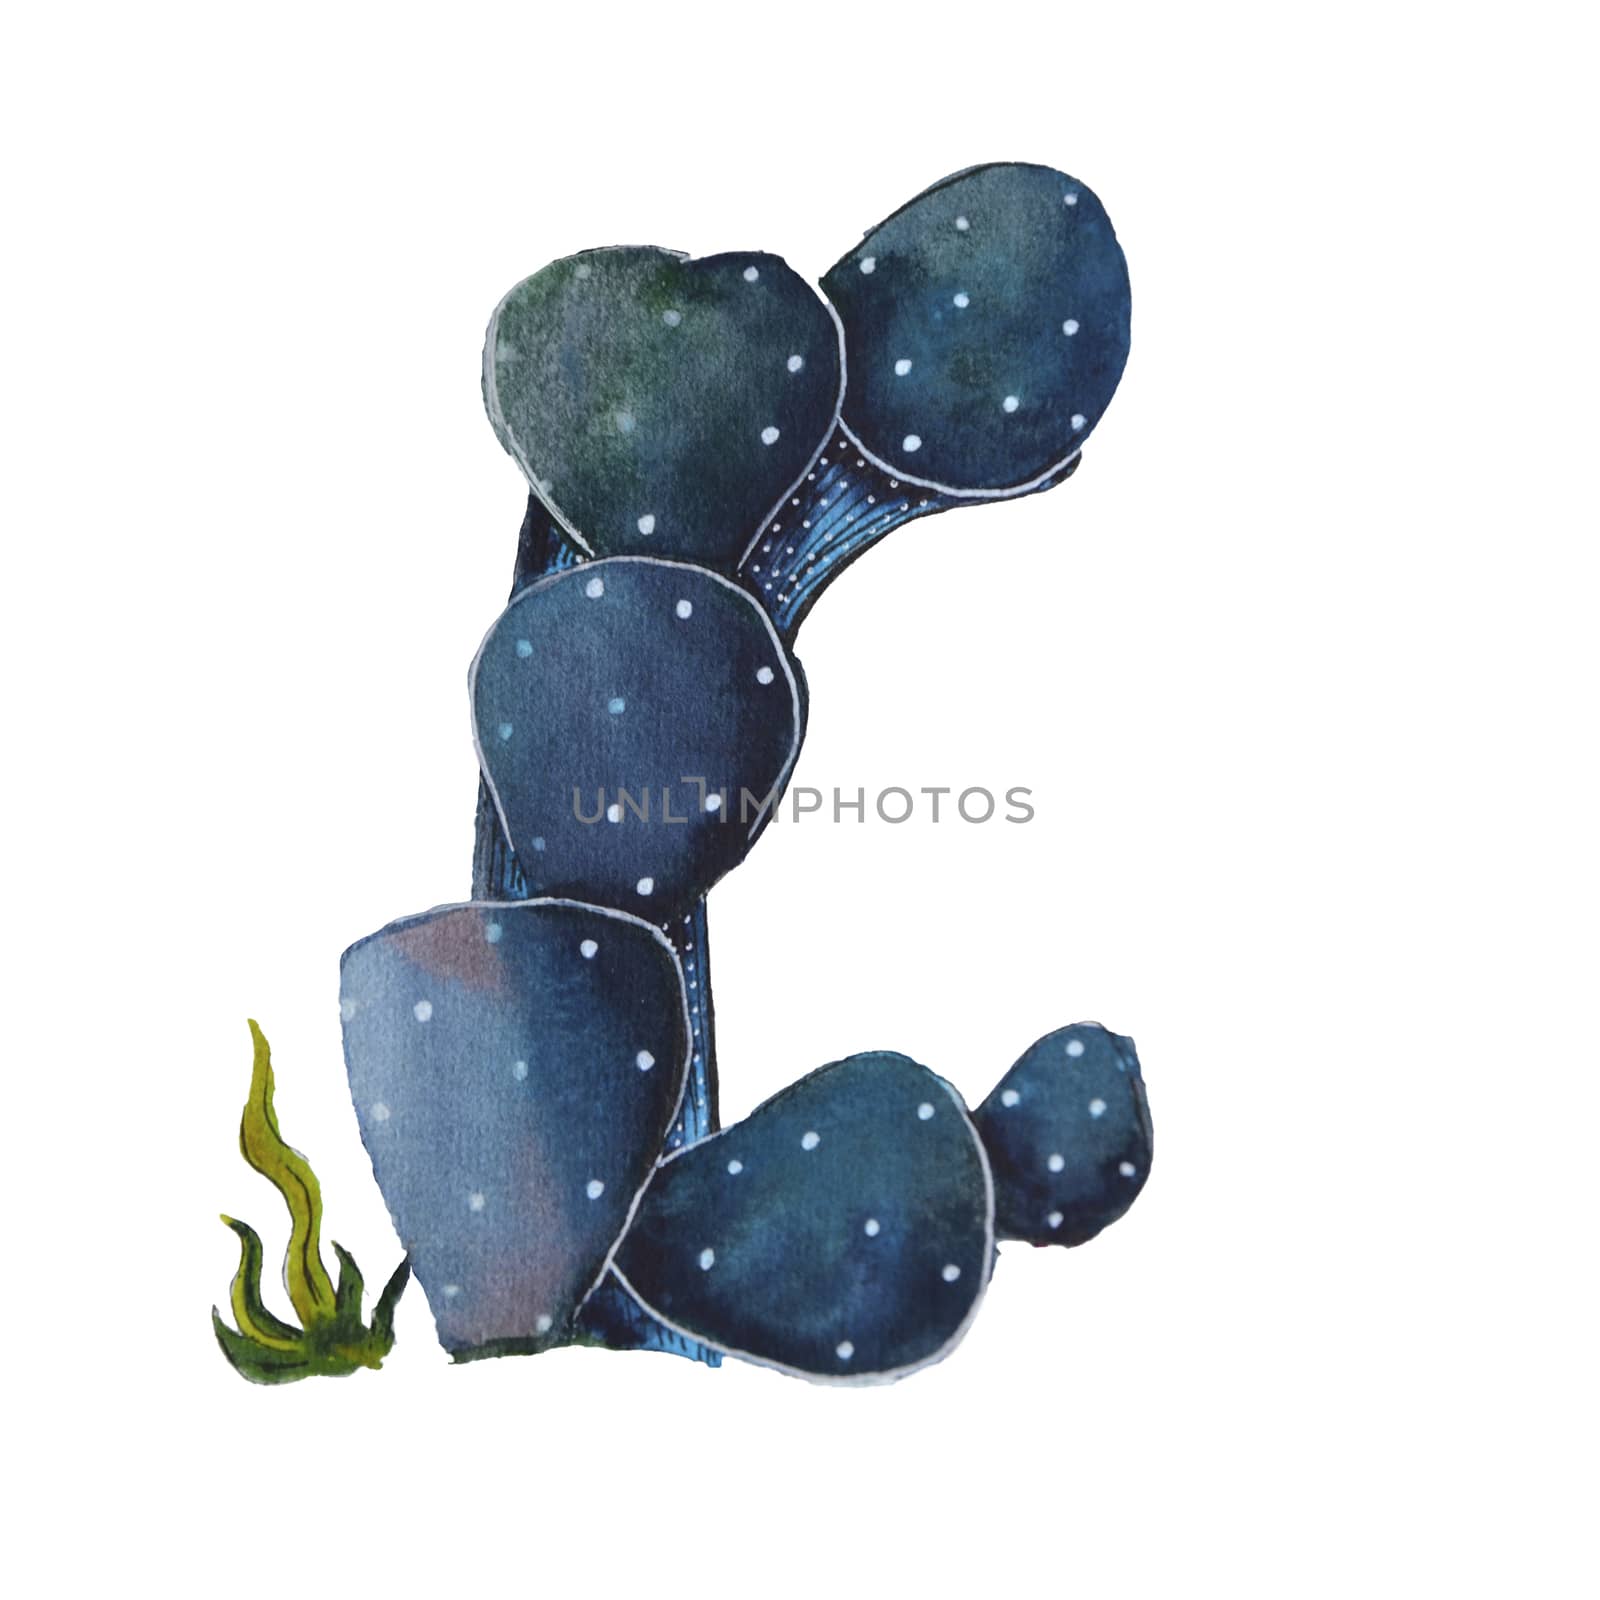 Letter C in the form of a cactus. Design element is perfect for logos, icons, children's alphabet and play.